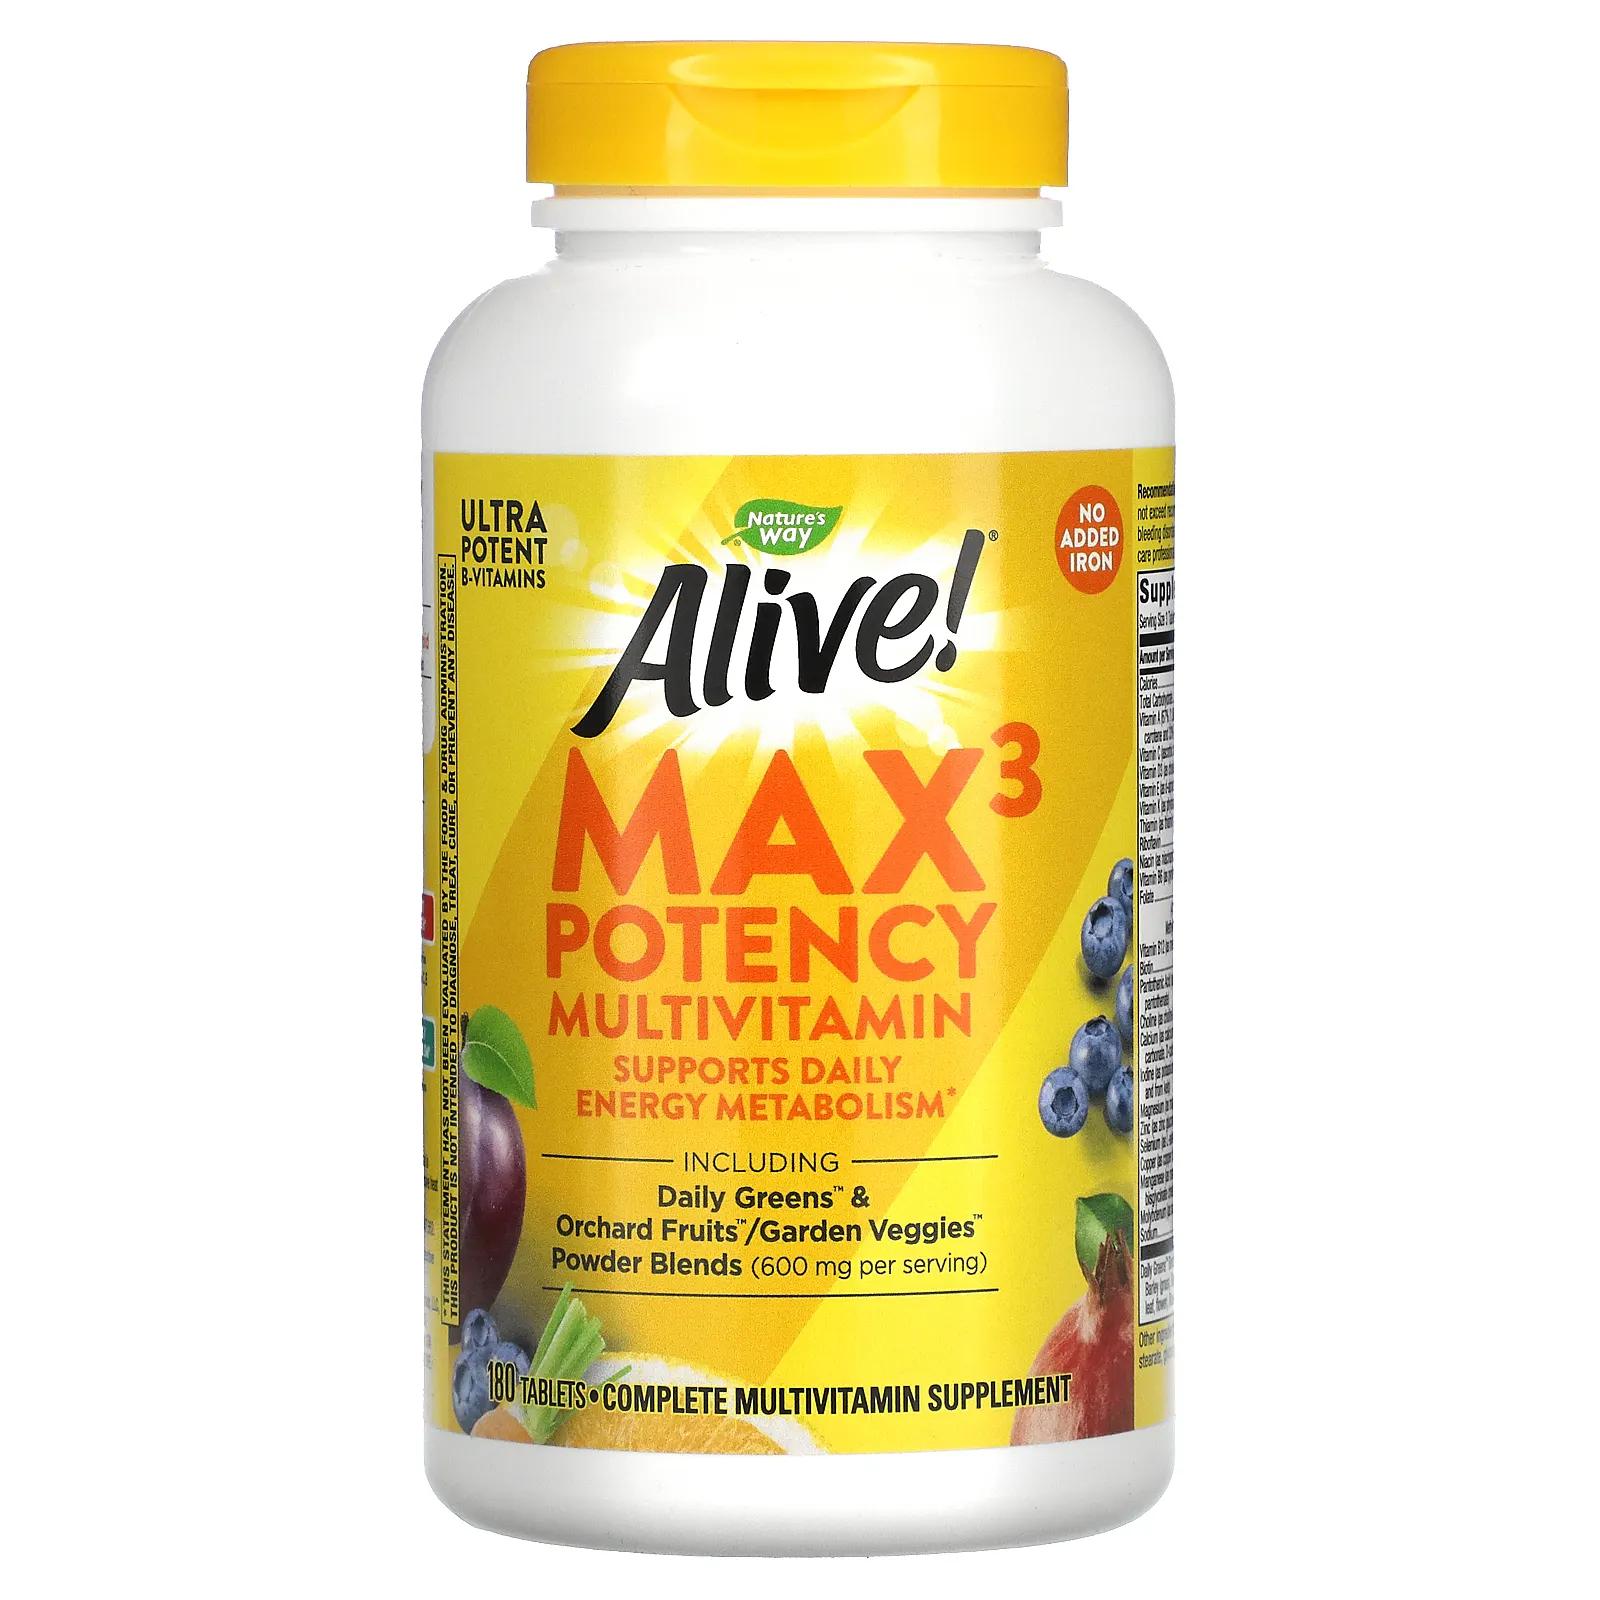 Nature's Way Alive! Max3 Daily Multi-Vitamin No Added Iron 180 Tablets